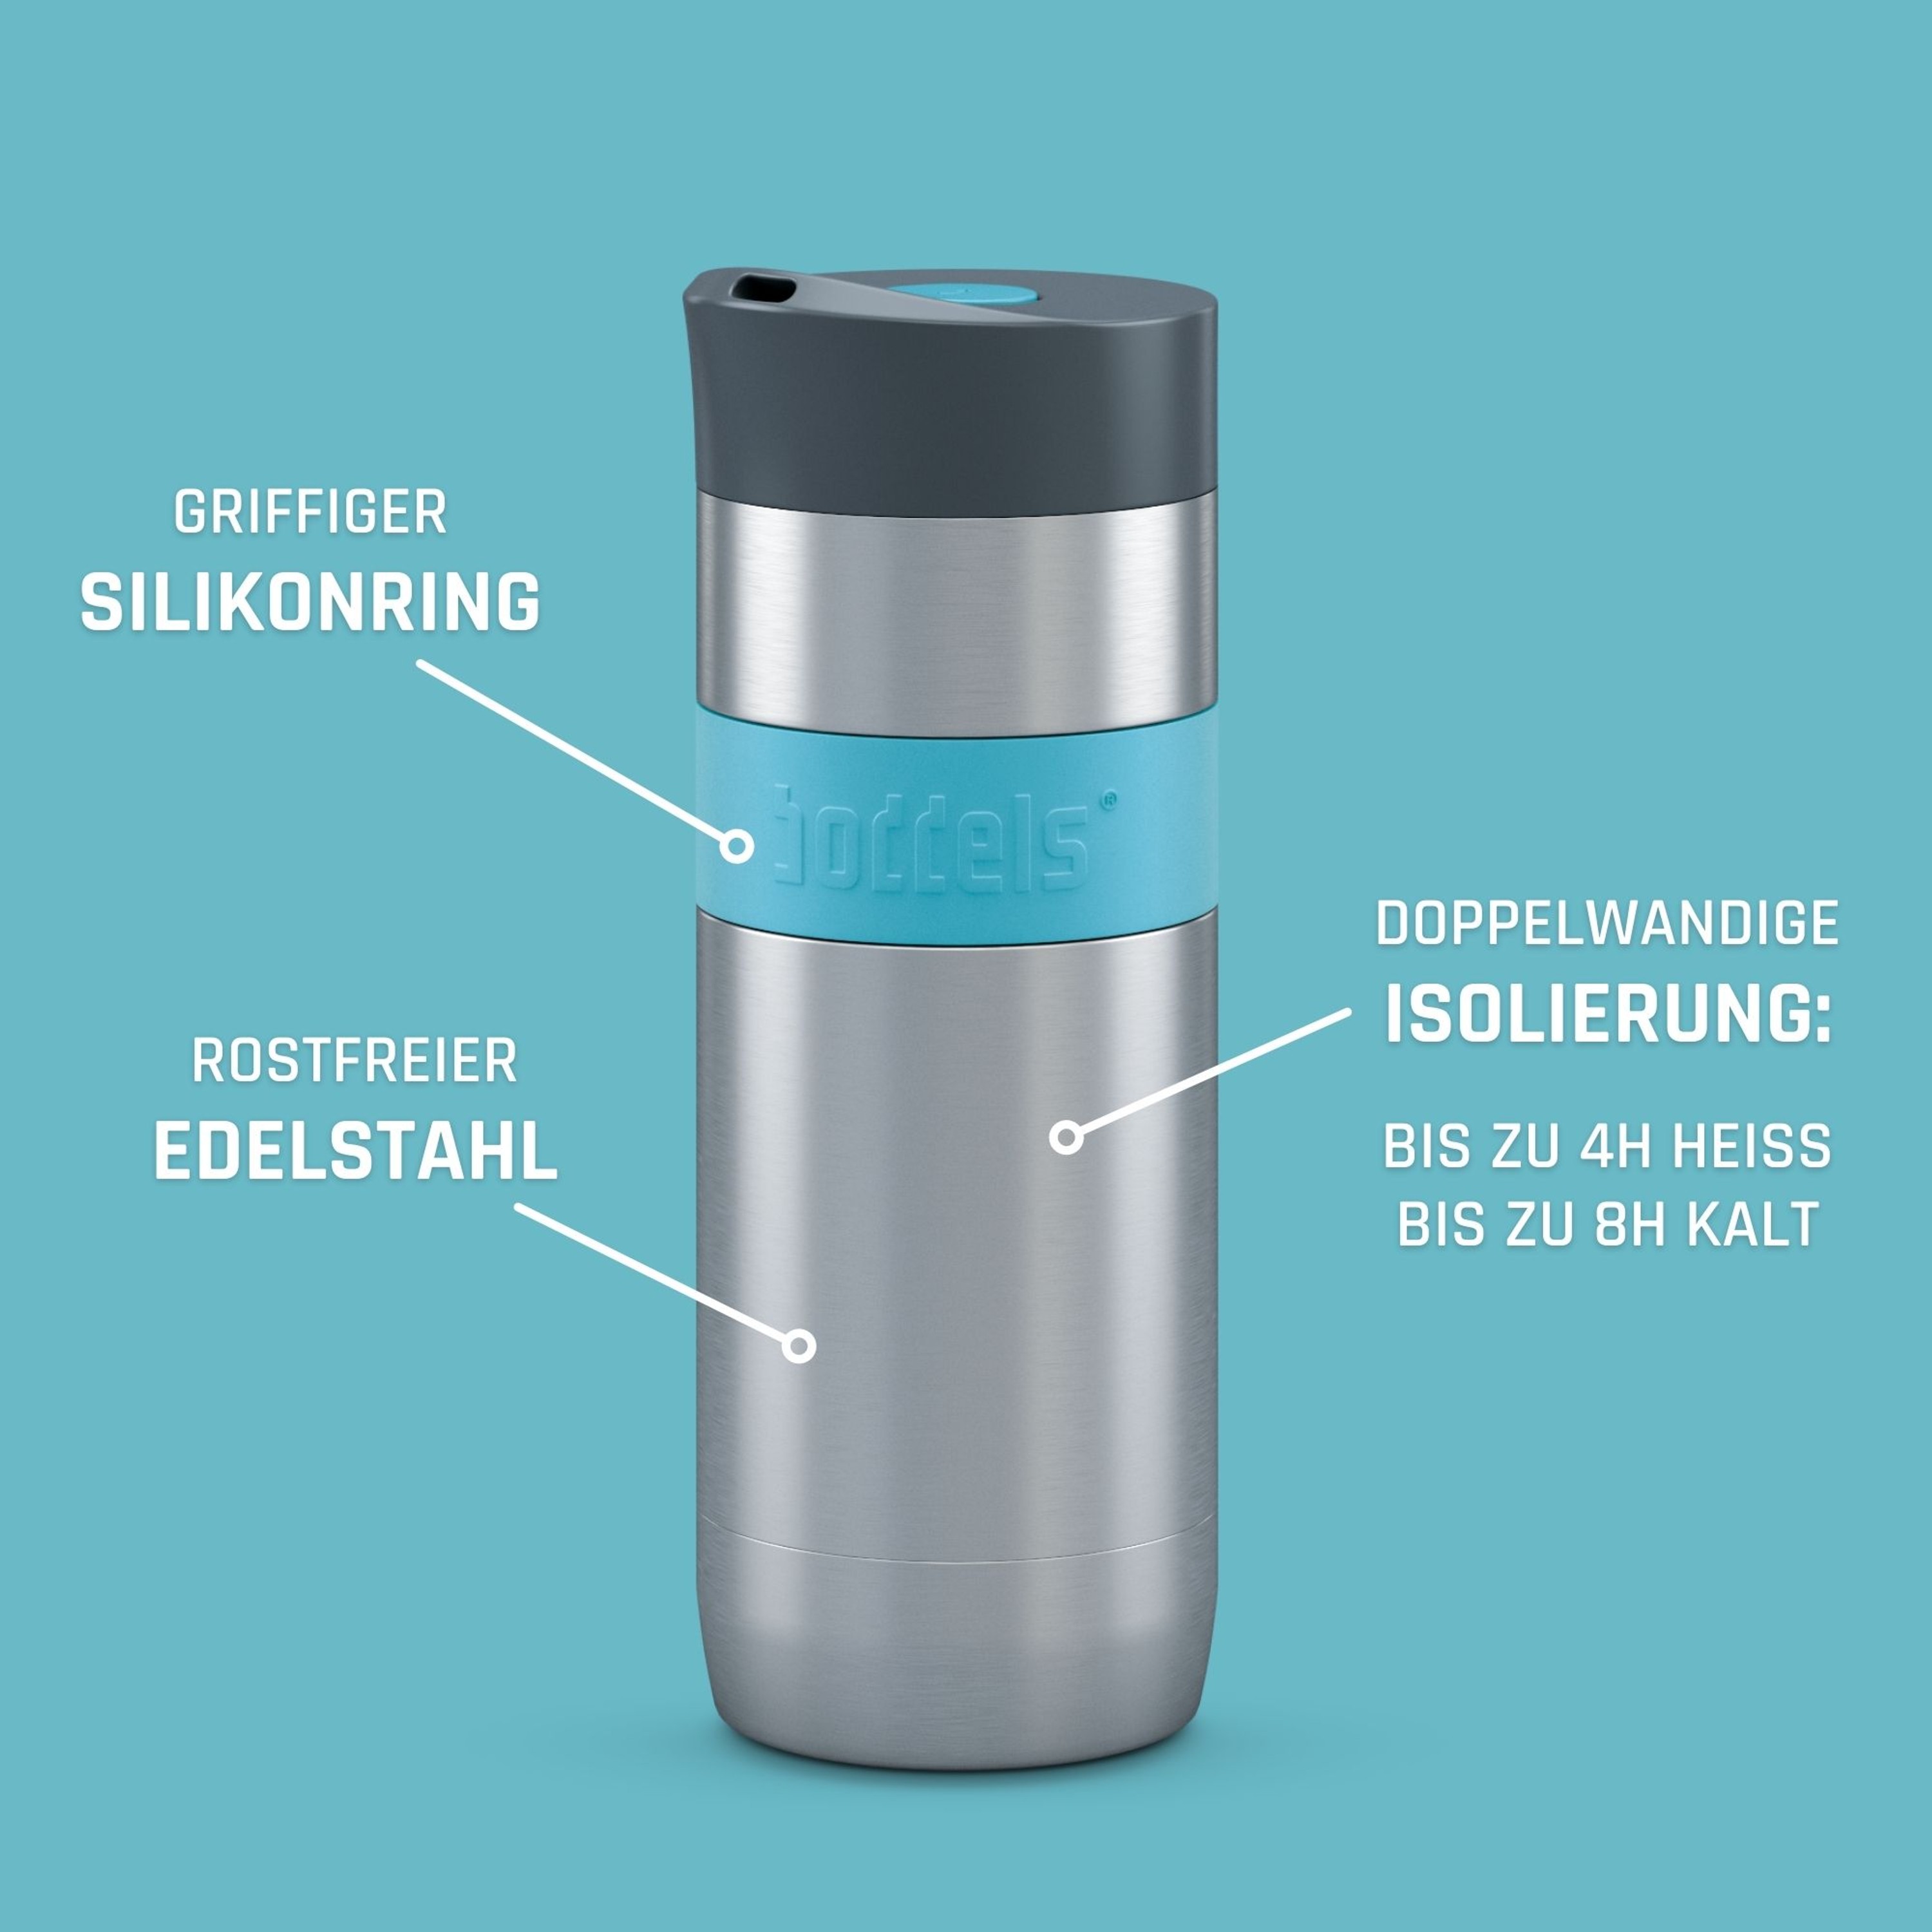 Thermobecher KOFFJE für warme life | Made Getränke - boddels for